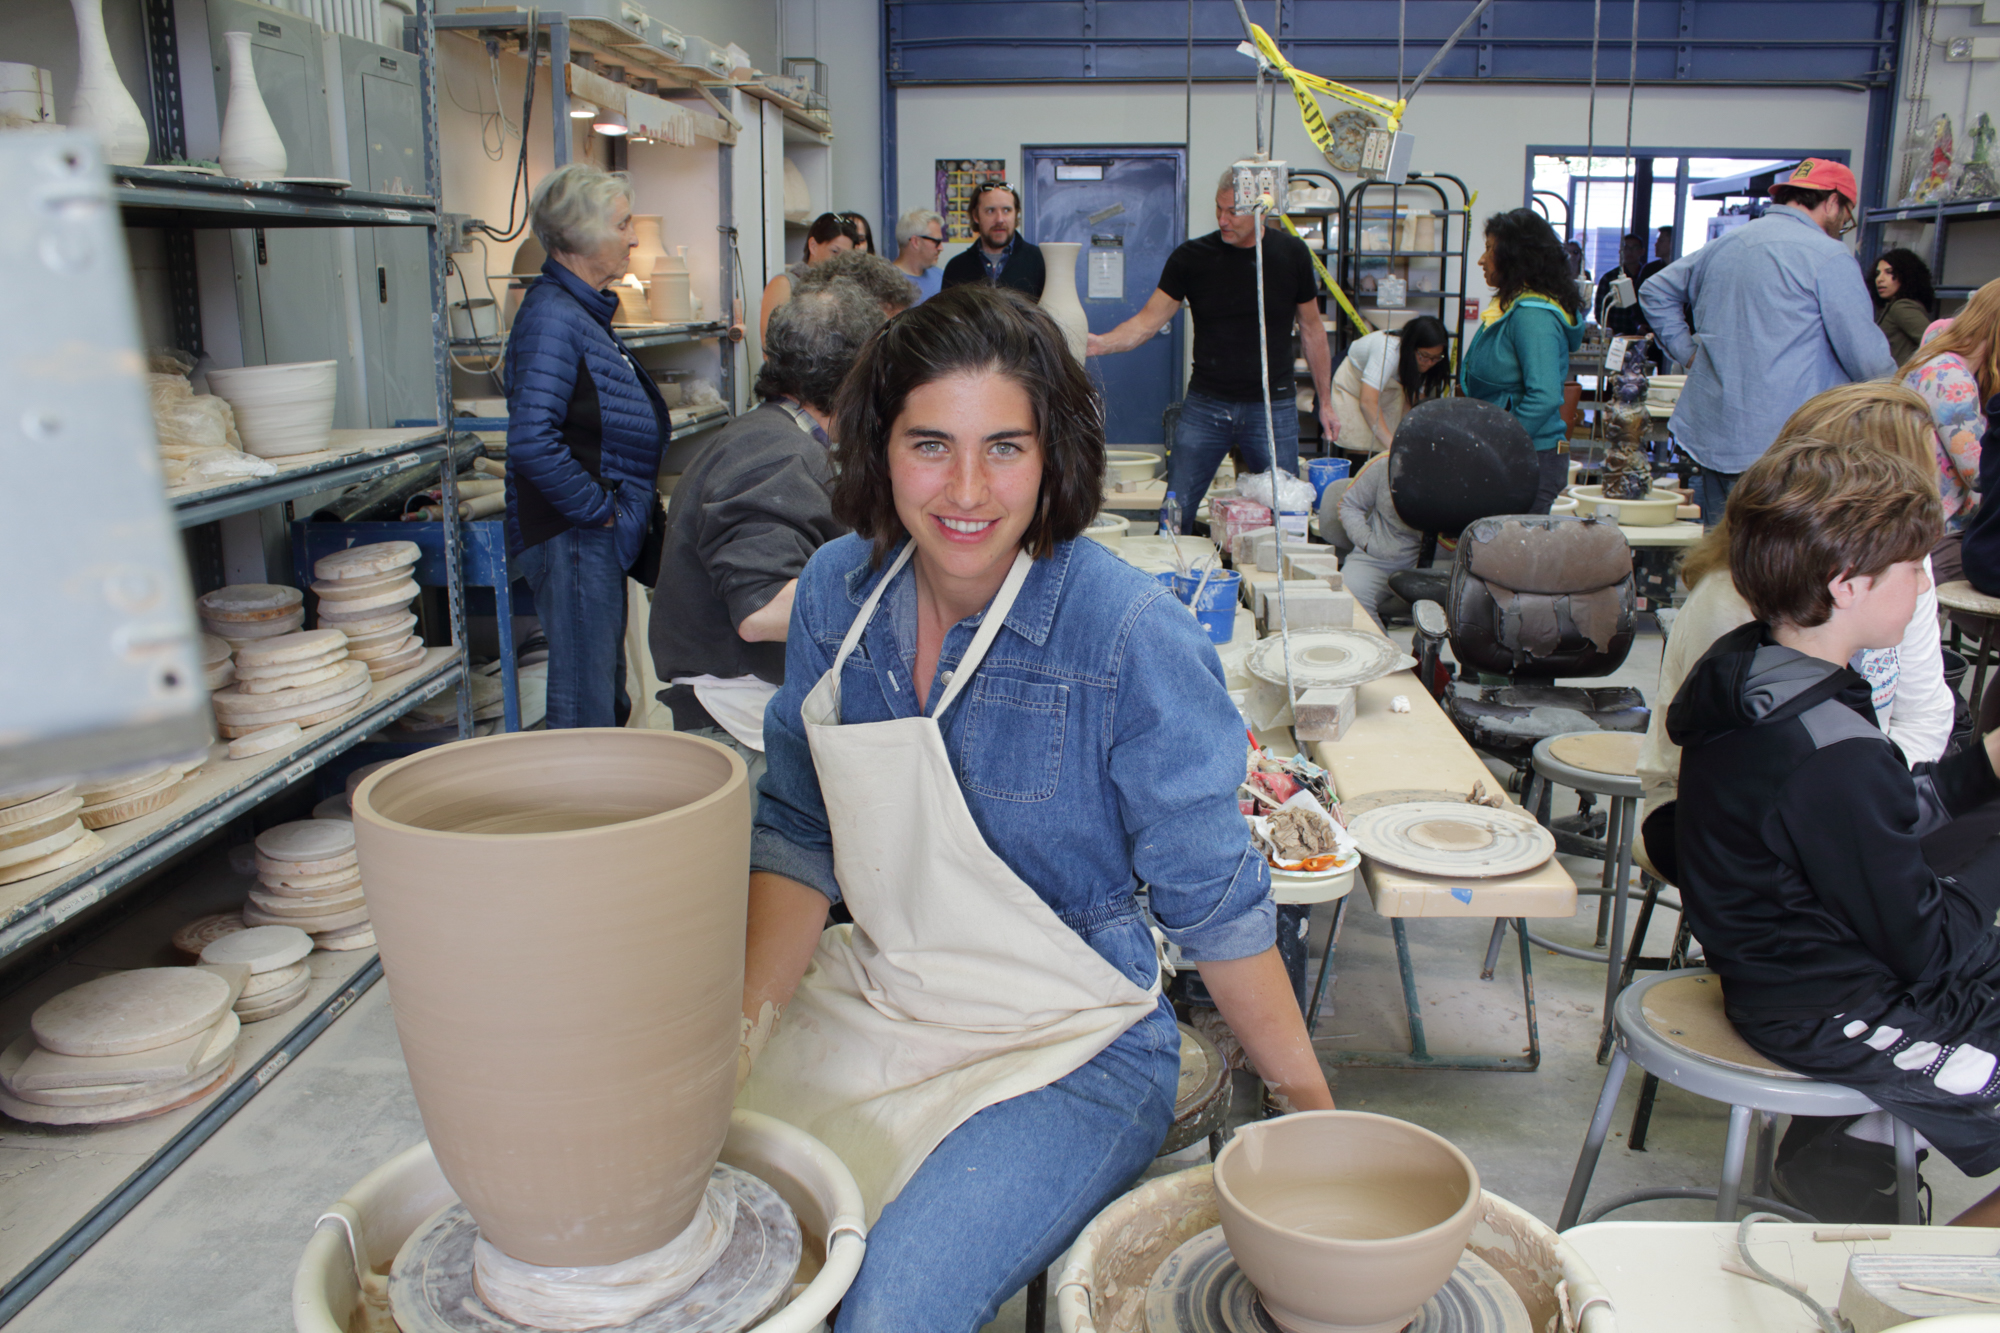  Nerea Nicholson, an Early Childhood Development major at SMC with a love for ceramics, poses while working on two pieces in the SMC Ceramic Arts Gallery at the 12 Annual Santa Monica ArtWalk on March 24th, 2018 in Santa Monica, California. (Heather 